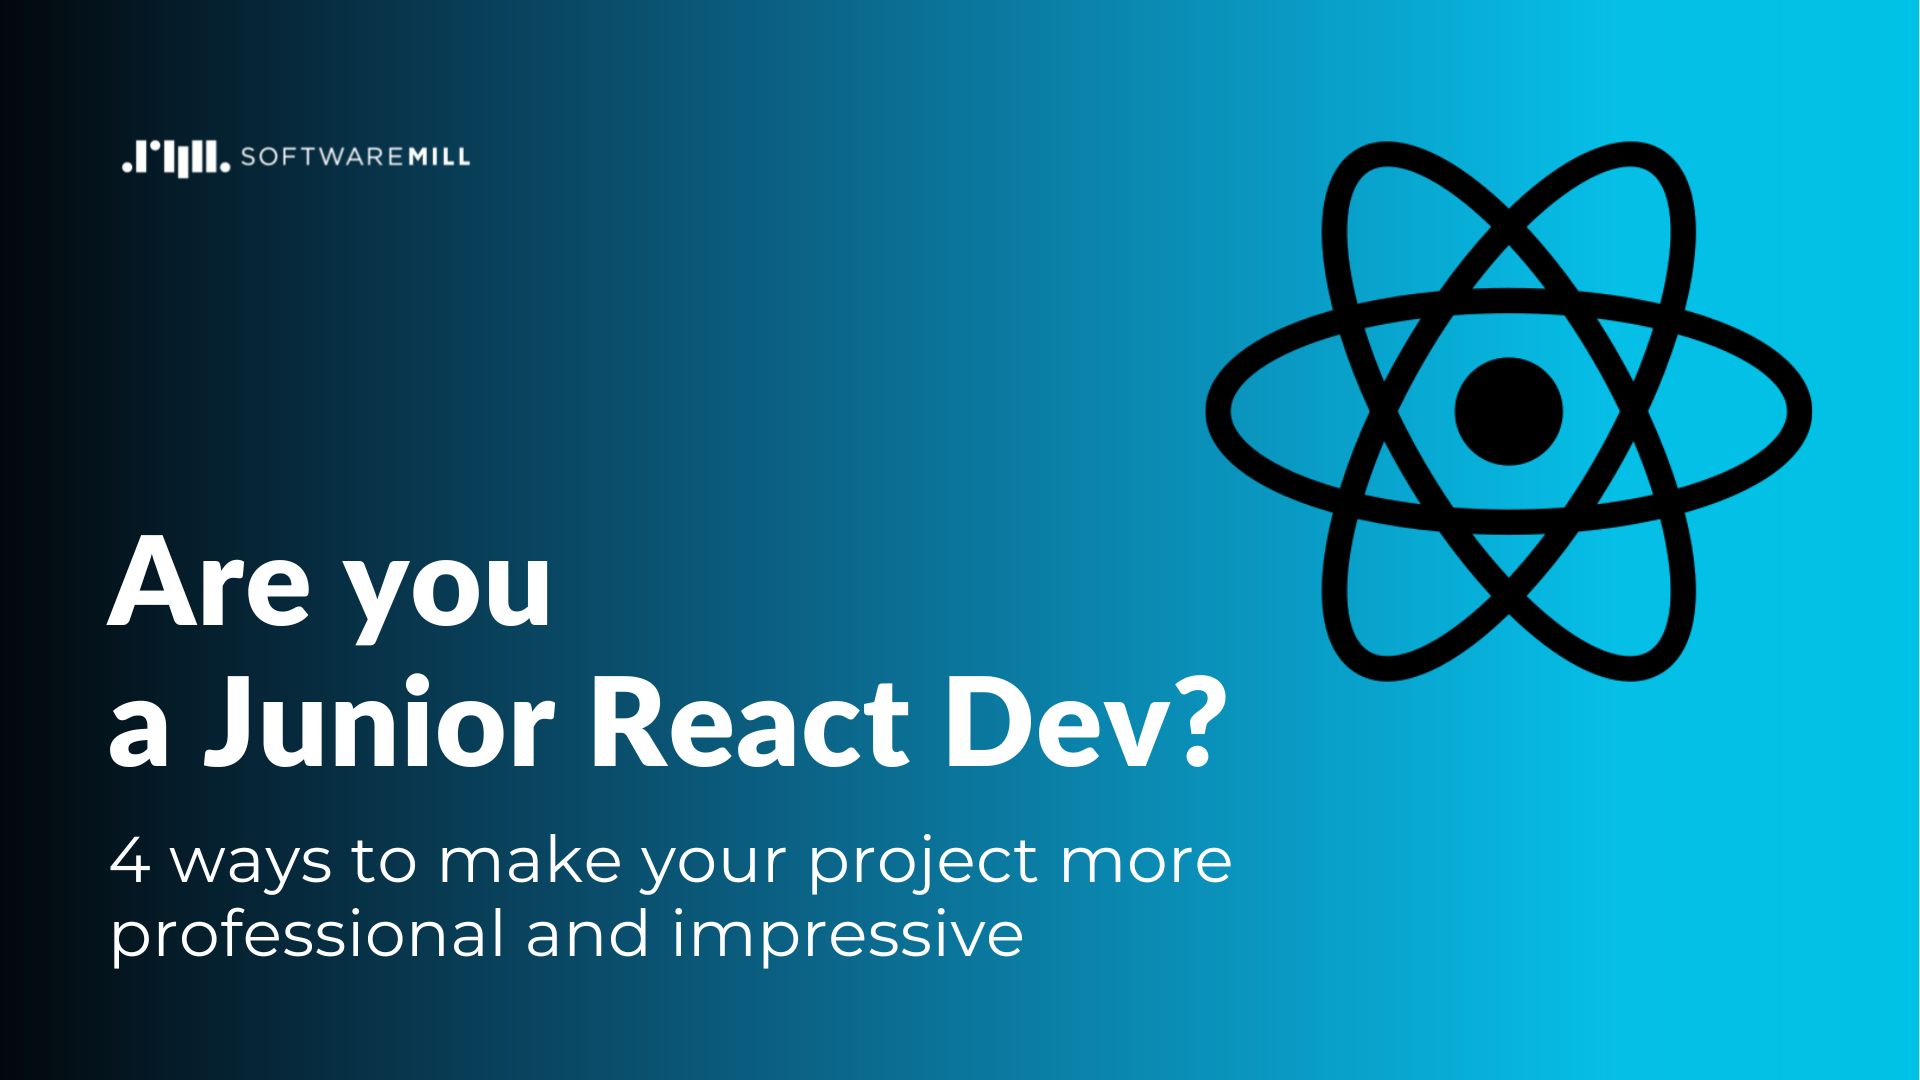 Are you a Junior React Dev? 4 ways to make your project more professional and impressive webp image